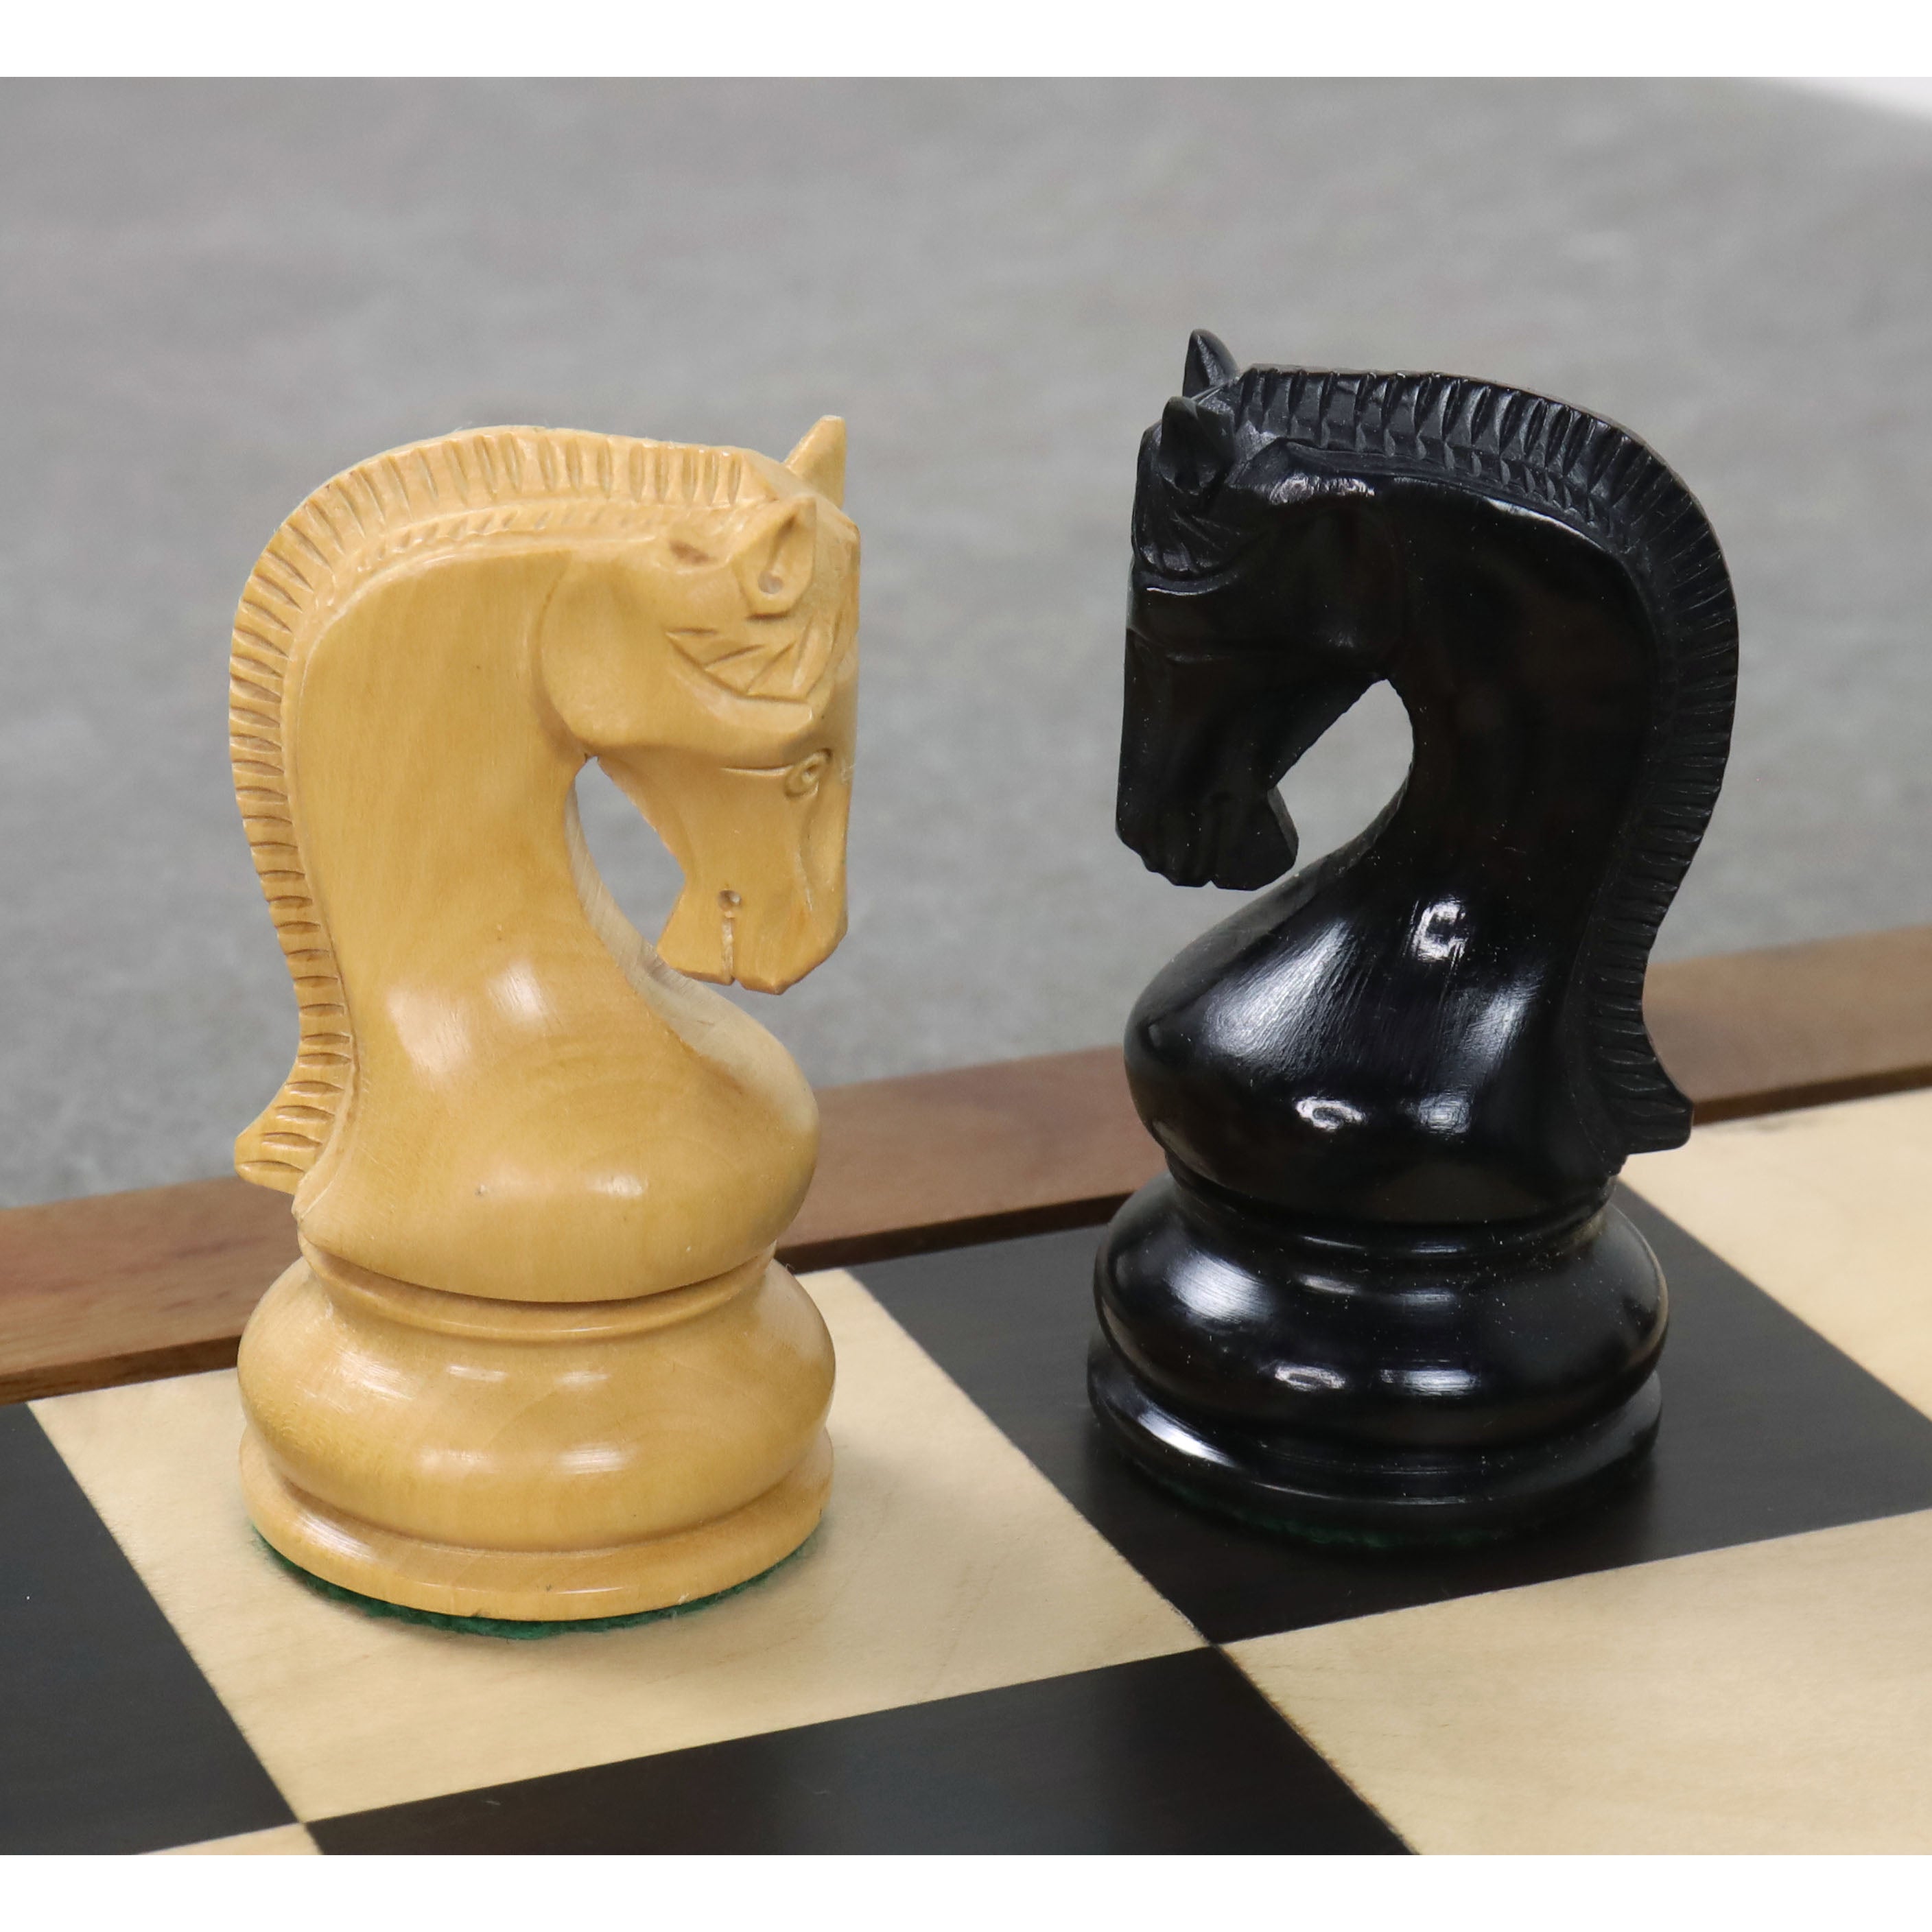 Combo of 4" Leningrad Staunton Chess Set - Pieces in Ebonised Boxwood with Board and Box